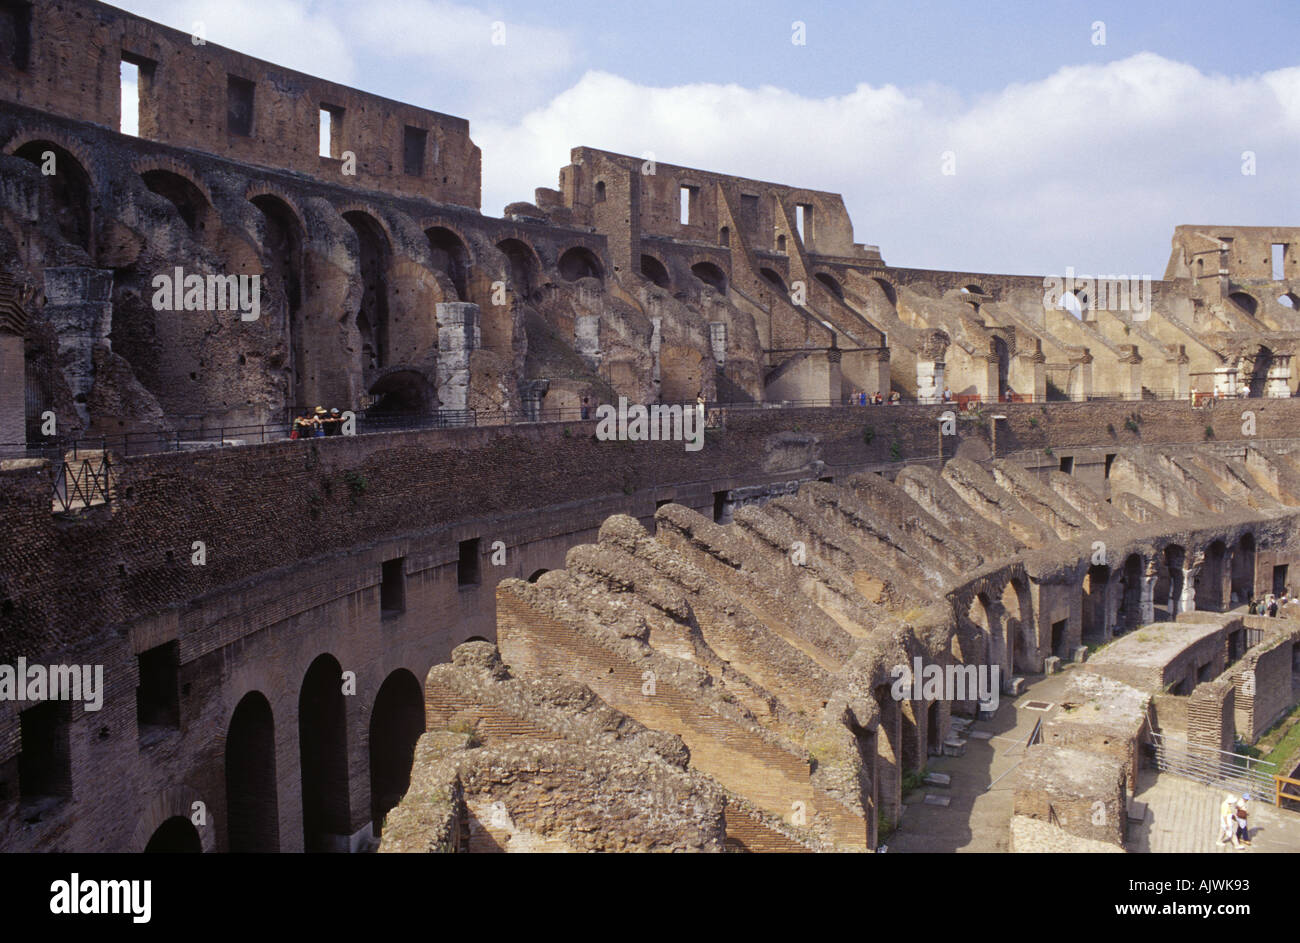 The Colosseum in Rome Italy Stock Photo